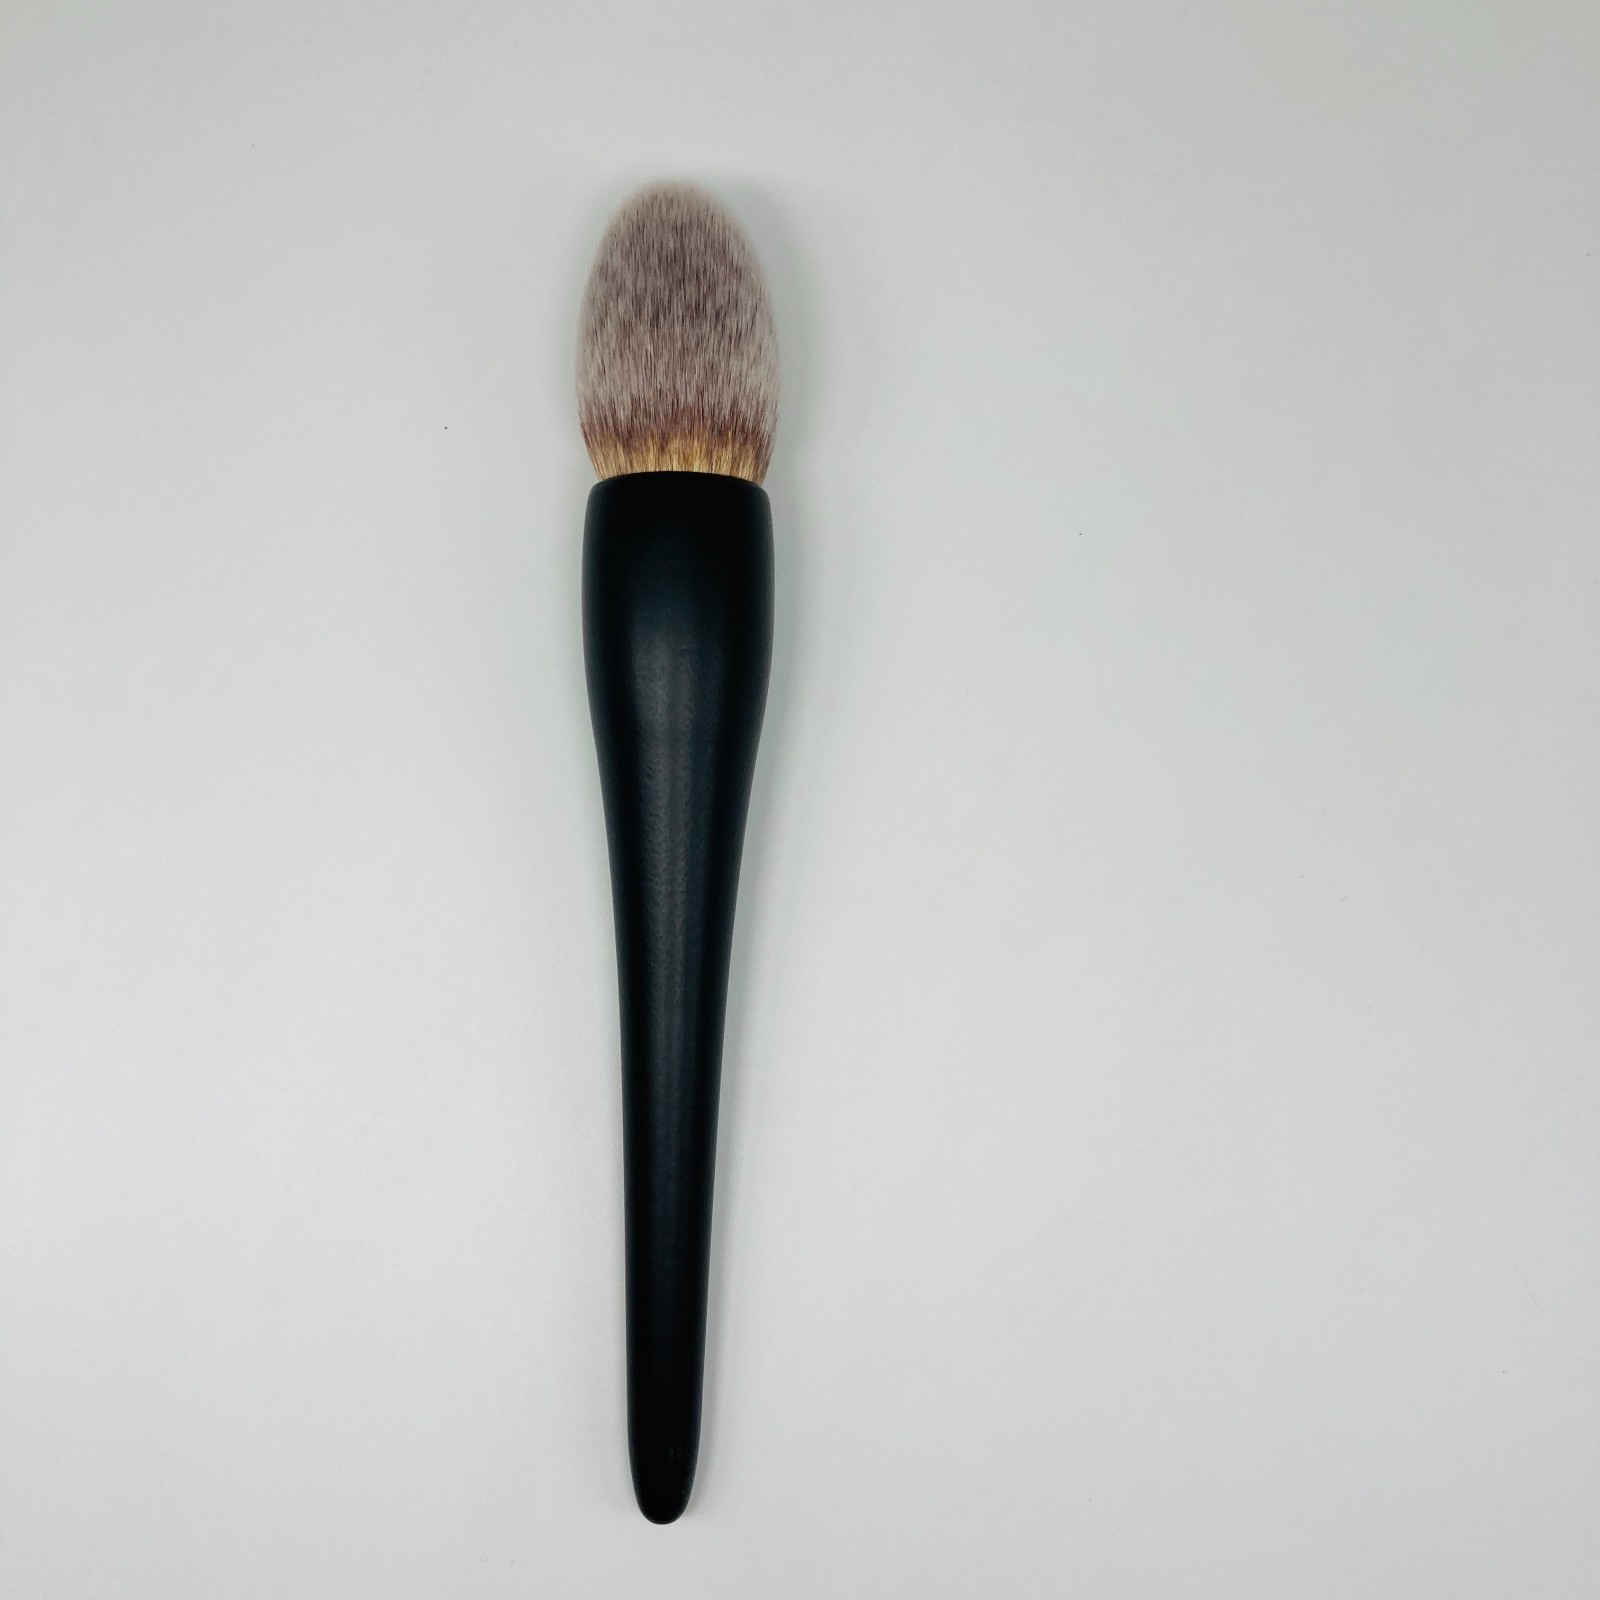 Suprabeauty new good makeup brushes best supplier for packaging-1